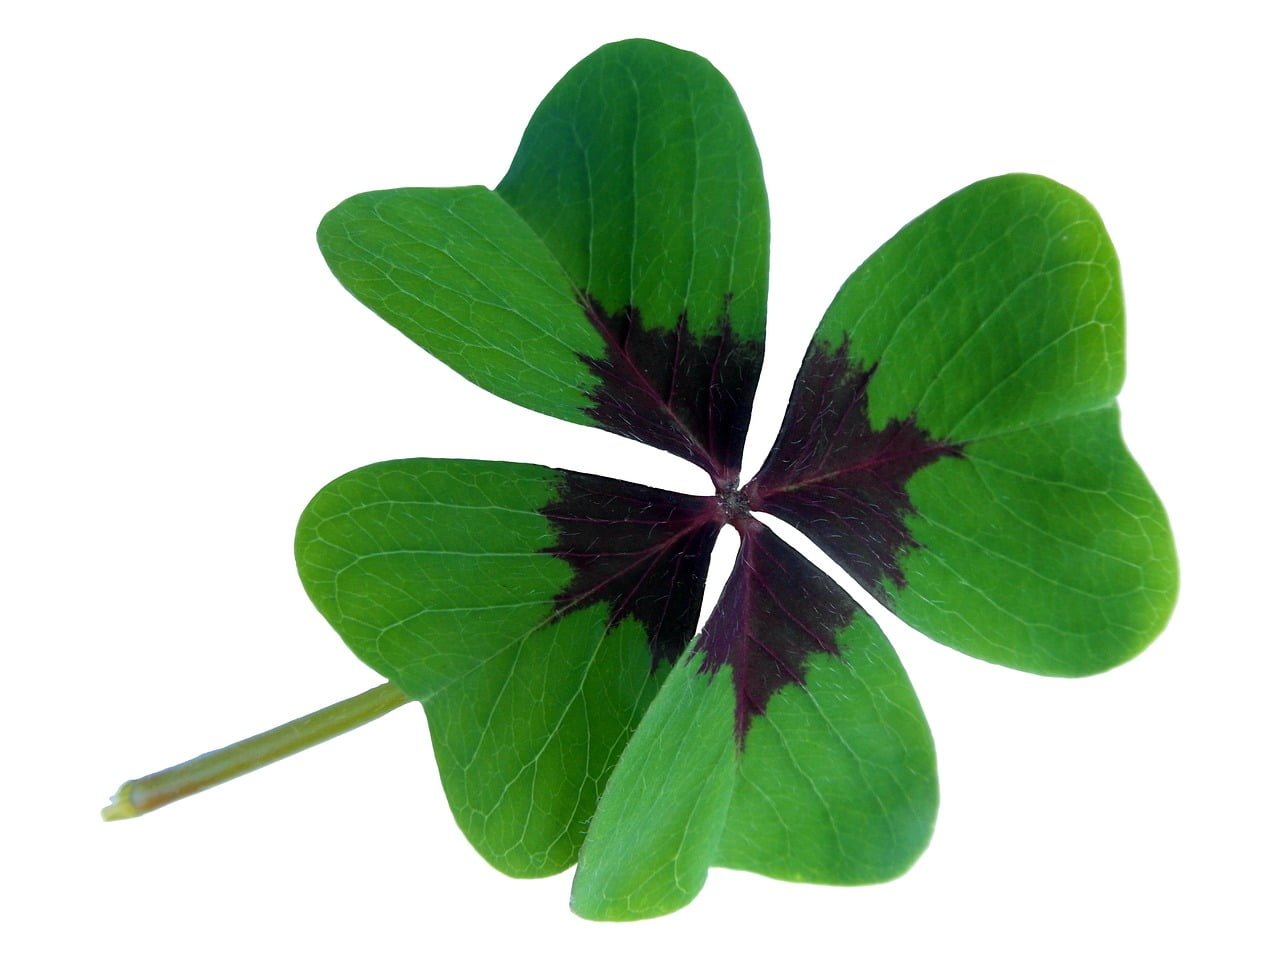 A four-leaf clover with dark markings at the base of each leaf, isolated on a white background.